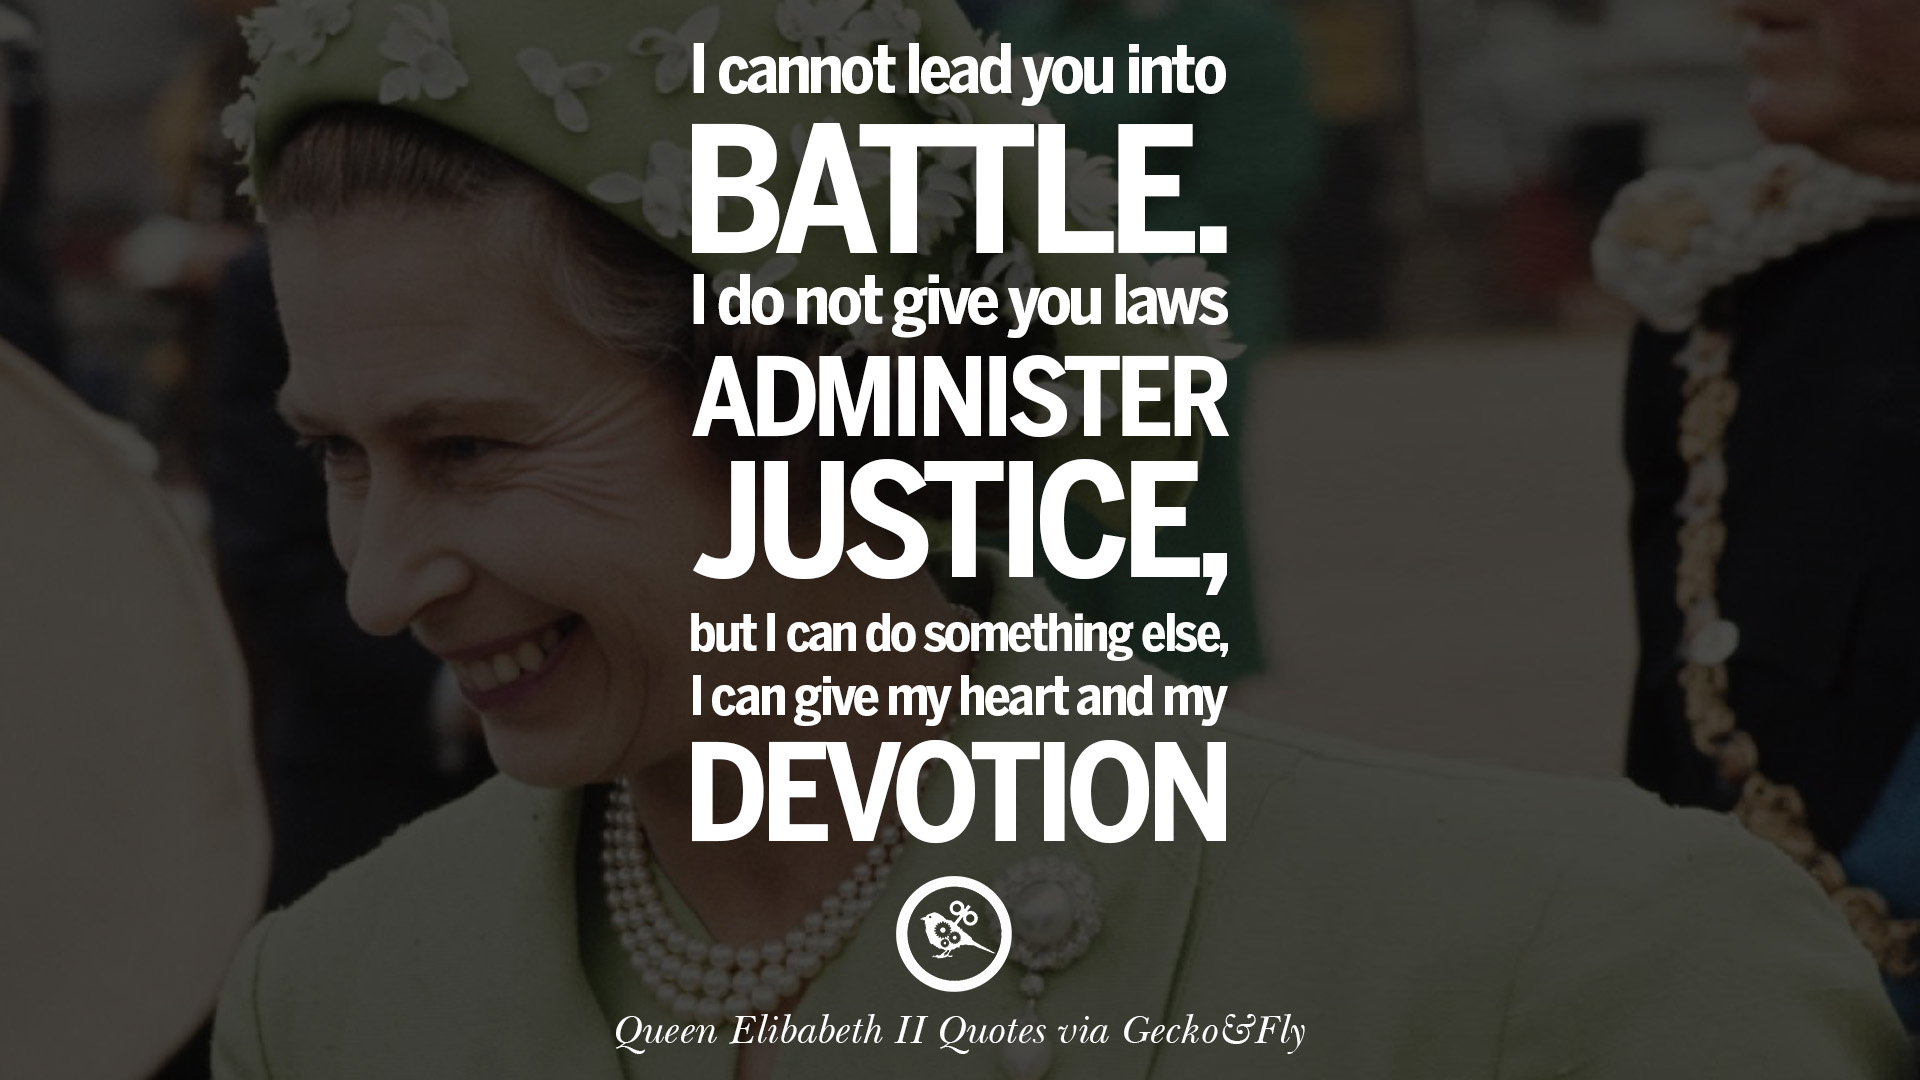 I cannot lead you into battle I do not give you laws or administer justice